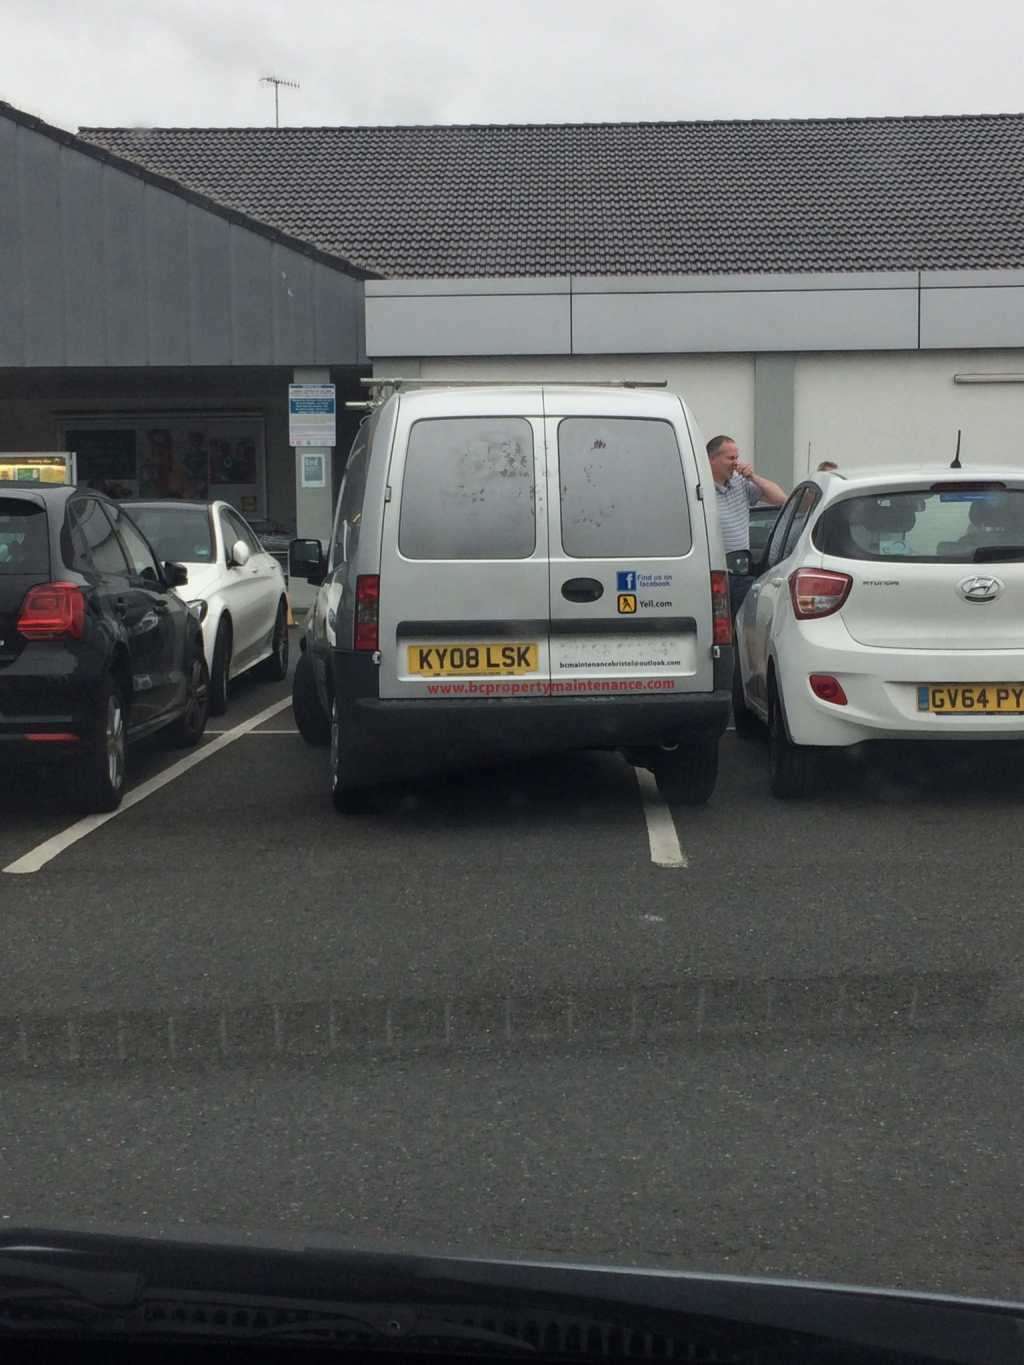 KY08 LSK displaying Inconsiderate Parking